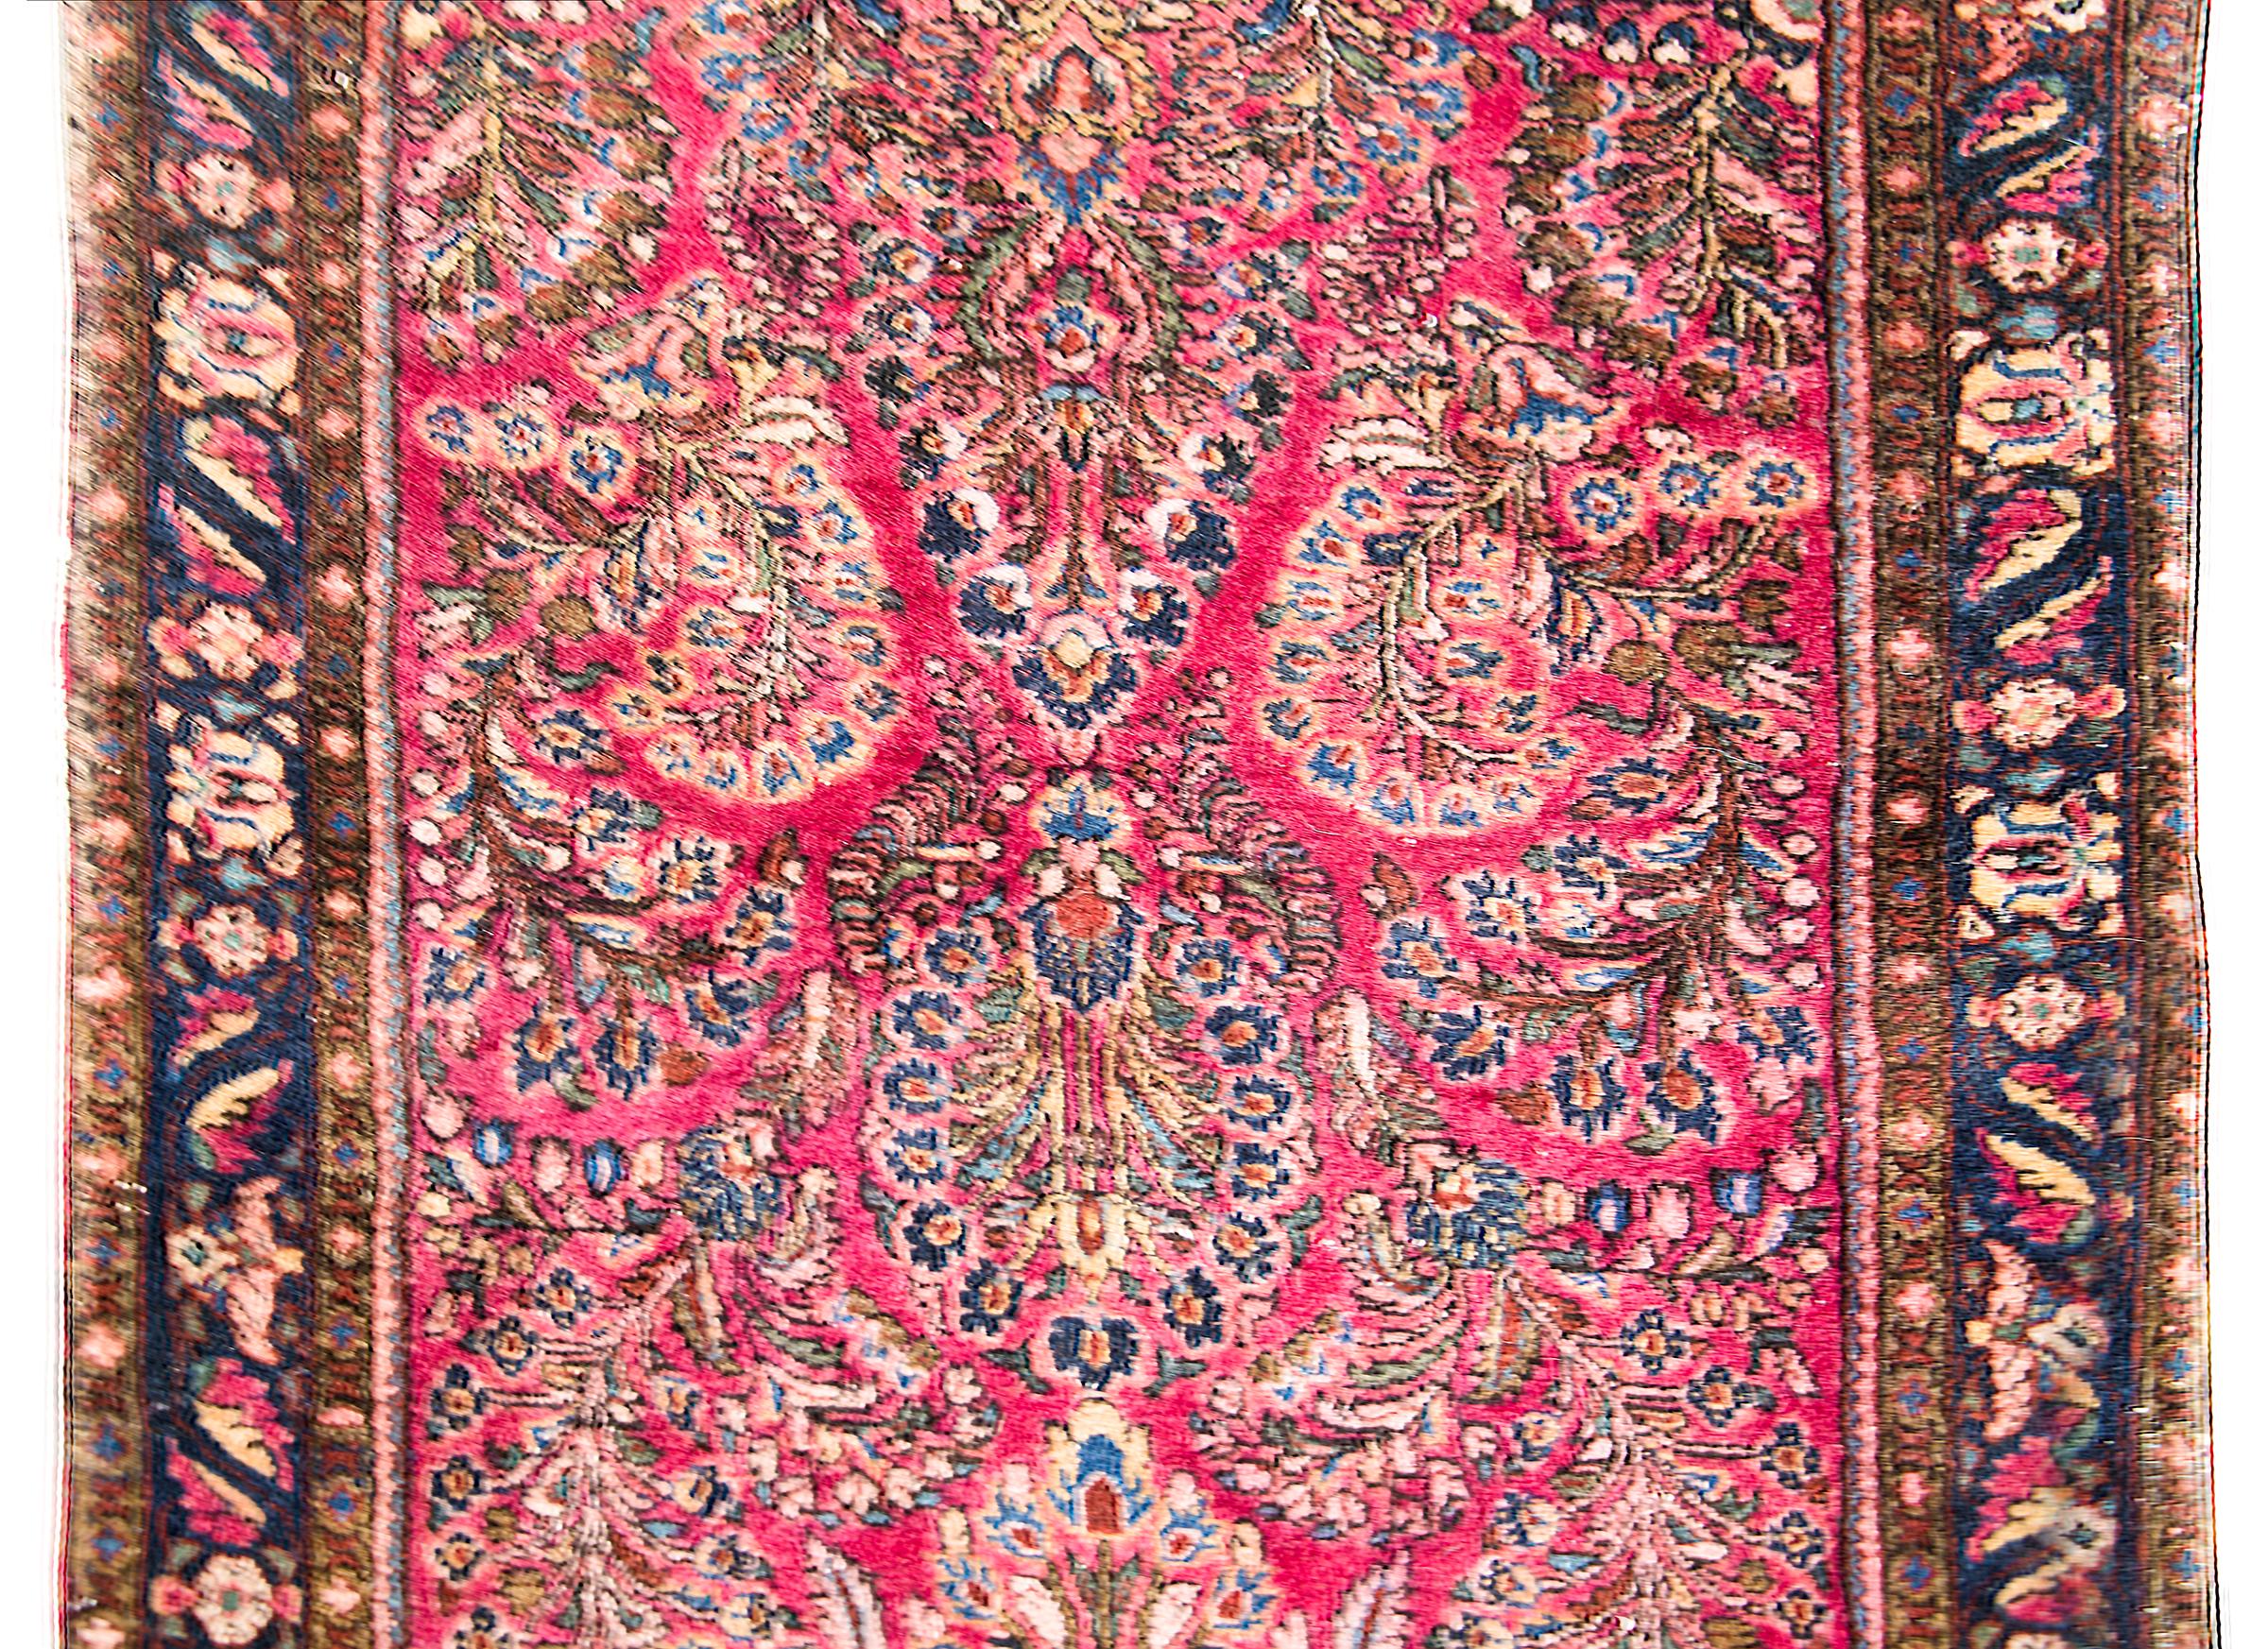 Wool Early 20th Century Persian Sarouk Runner For Sale